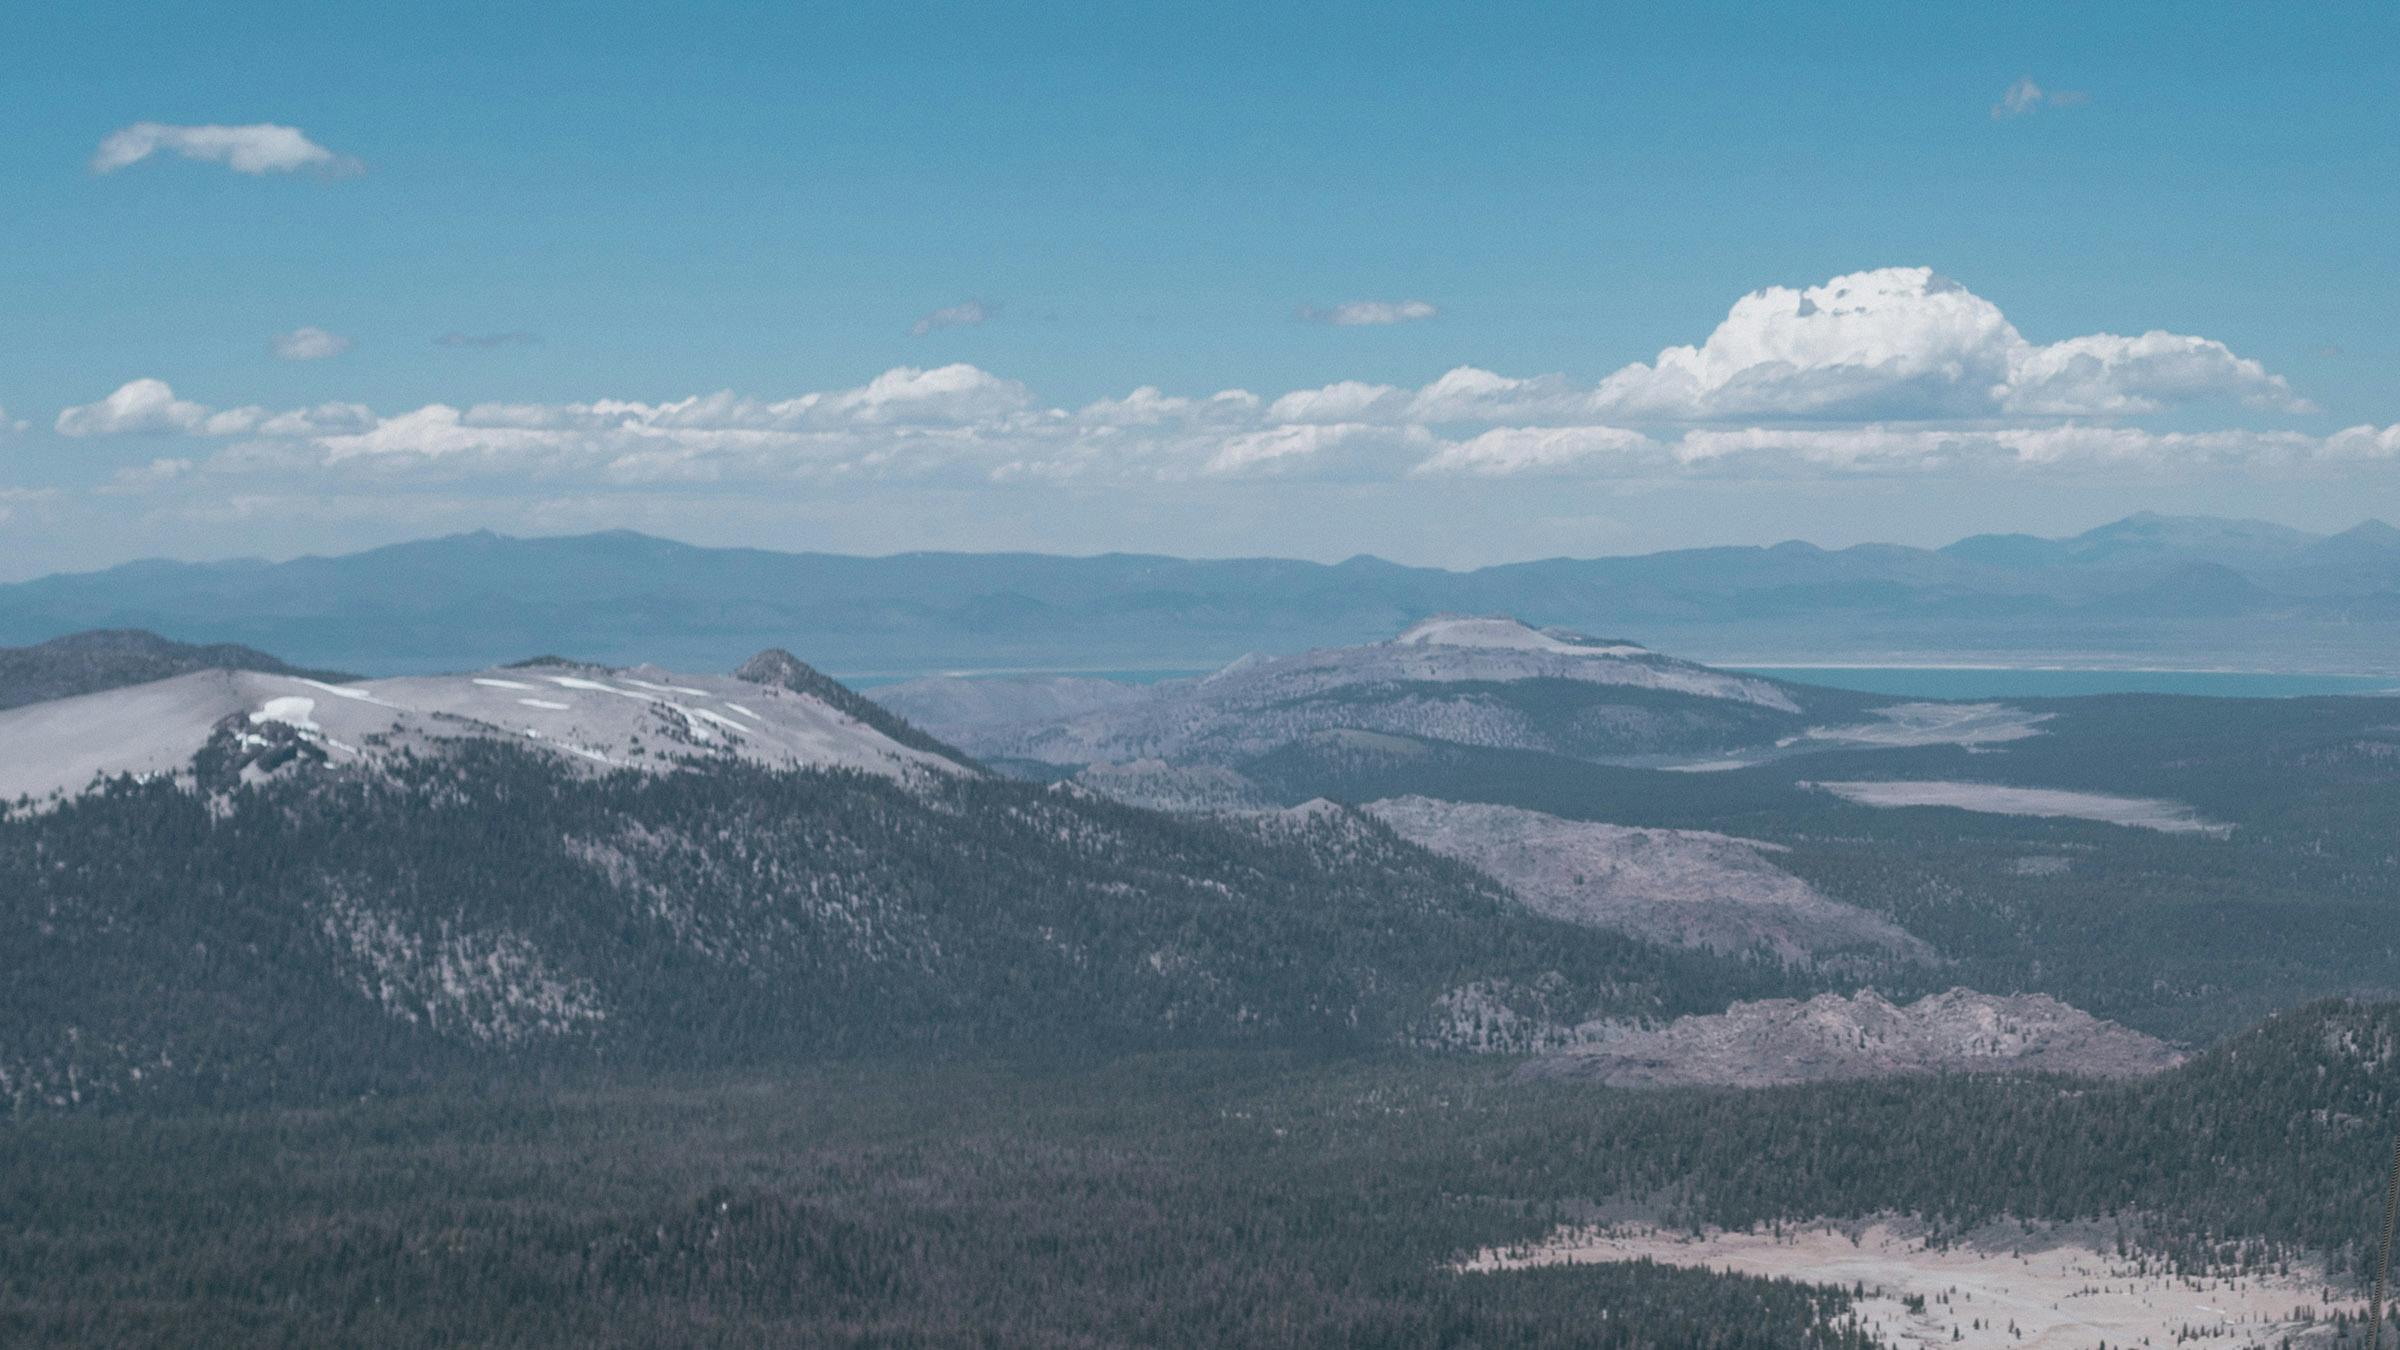 View of Long Valley Caldera from Mammoth Mountain